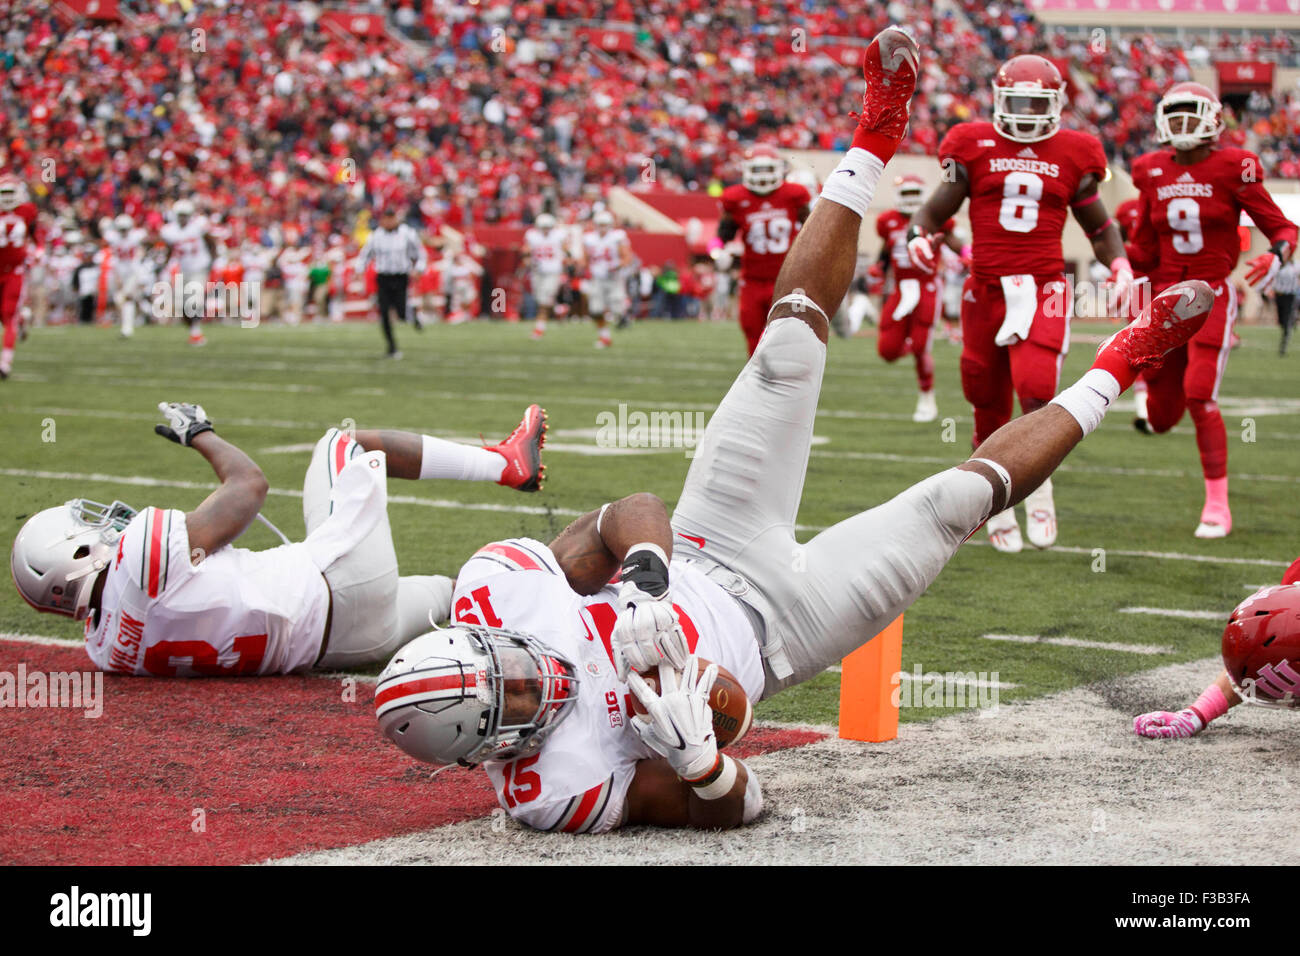 October 3, 2015: Ohio State Buckeyes running back Ezekiel Elliott (15) dives in for the touchdown during the NCAA football game between the Ohio State Buckeyes and the Indiana Hoosiers at the Memorial Stadium in Bloomington, Indiana. Ohio State Buckeyes won 34-27. Christopher Szagola/CSM Stock Photo